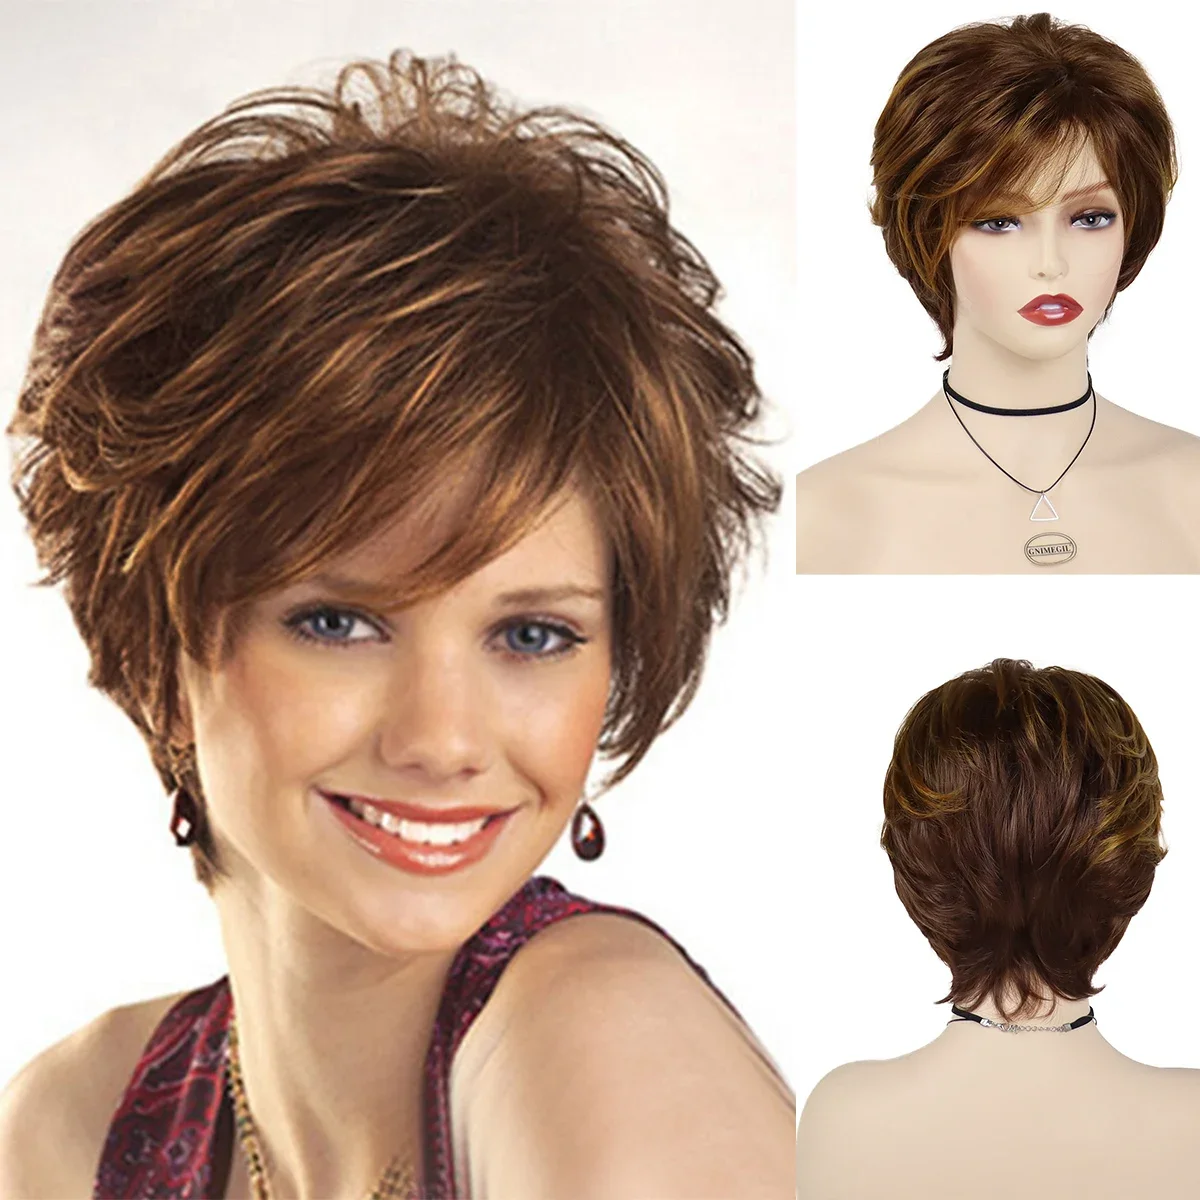 

GNIMEGIL Synthetic Natural Wigs for White Women Auburn Wig Female Red Brown with Highlight Wig Hair with Bangs Short Hairstyle